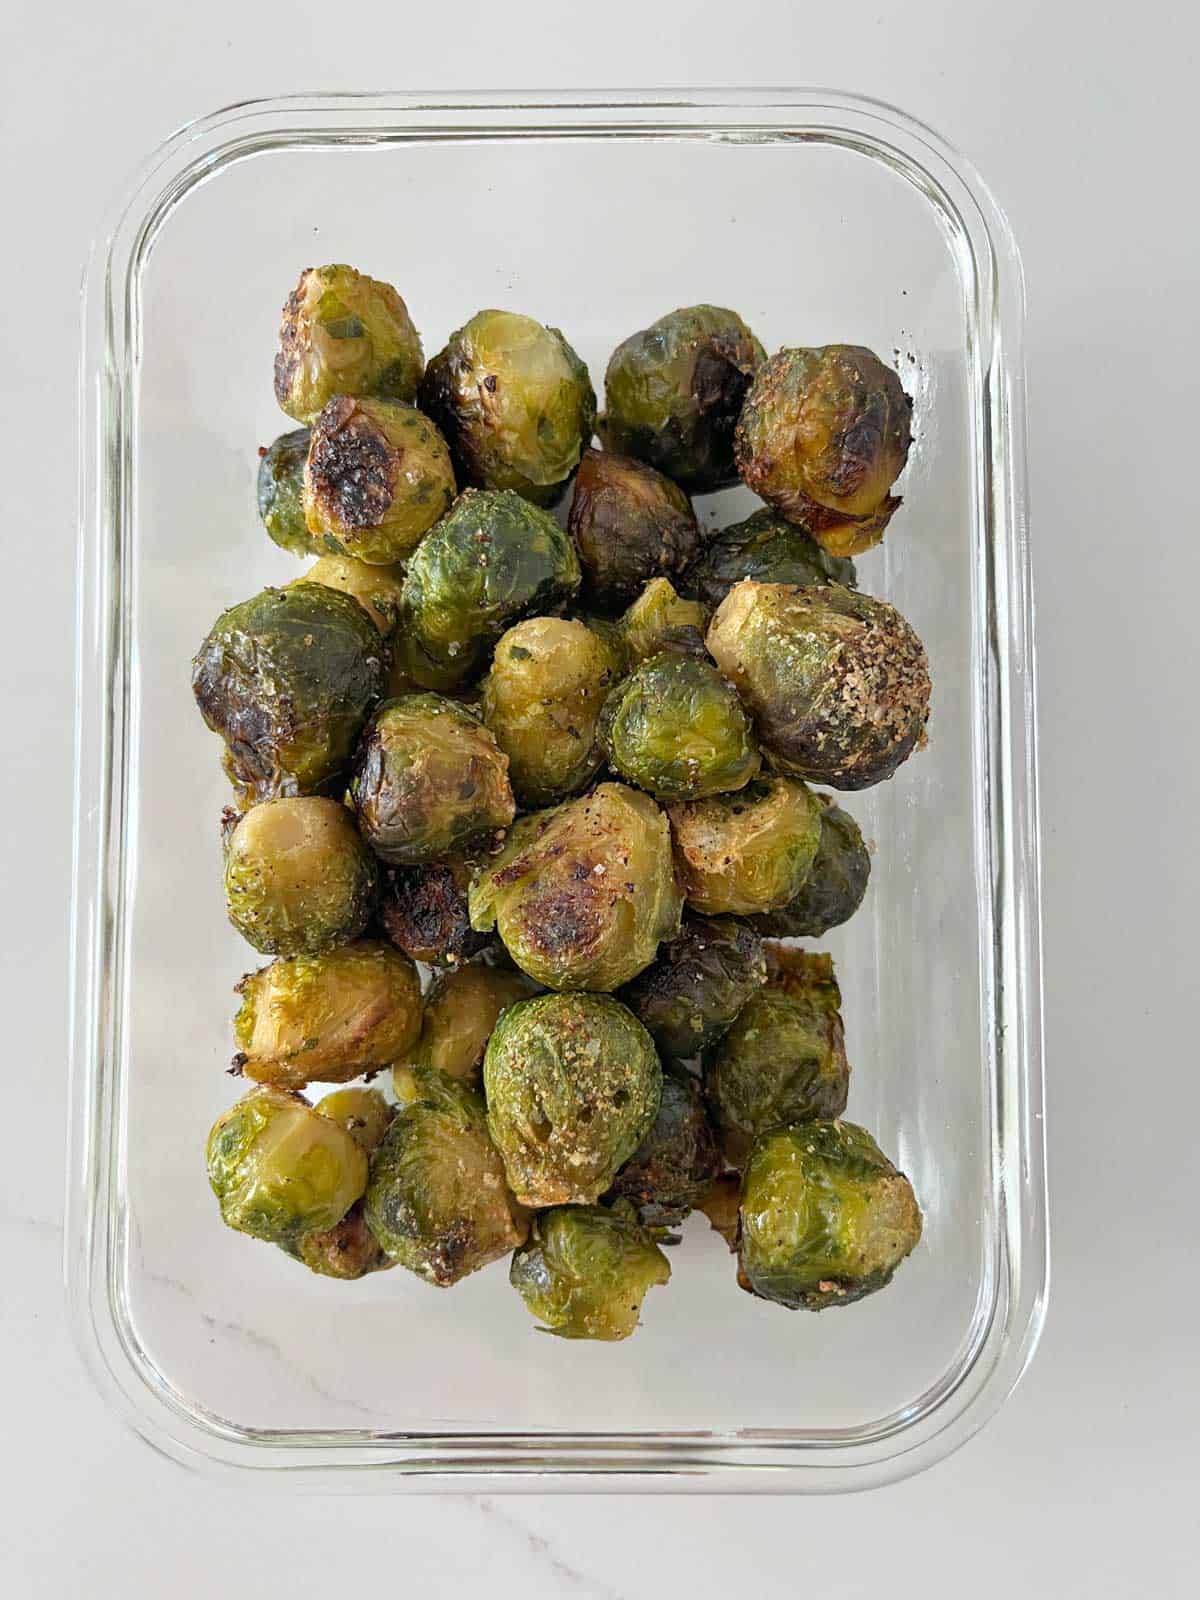 Roasted frozen Brussels sprouts leftovers.